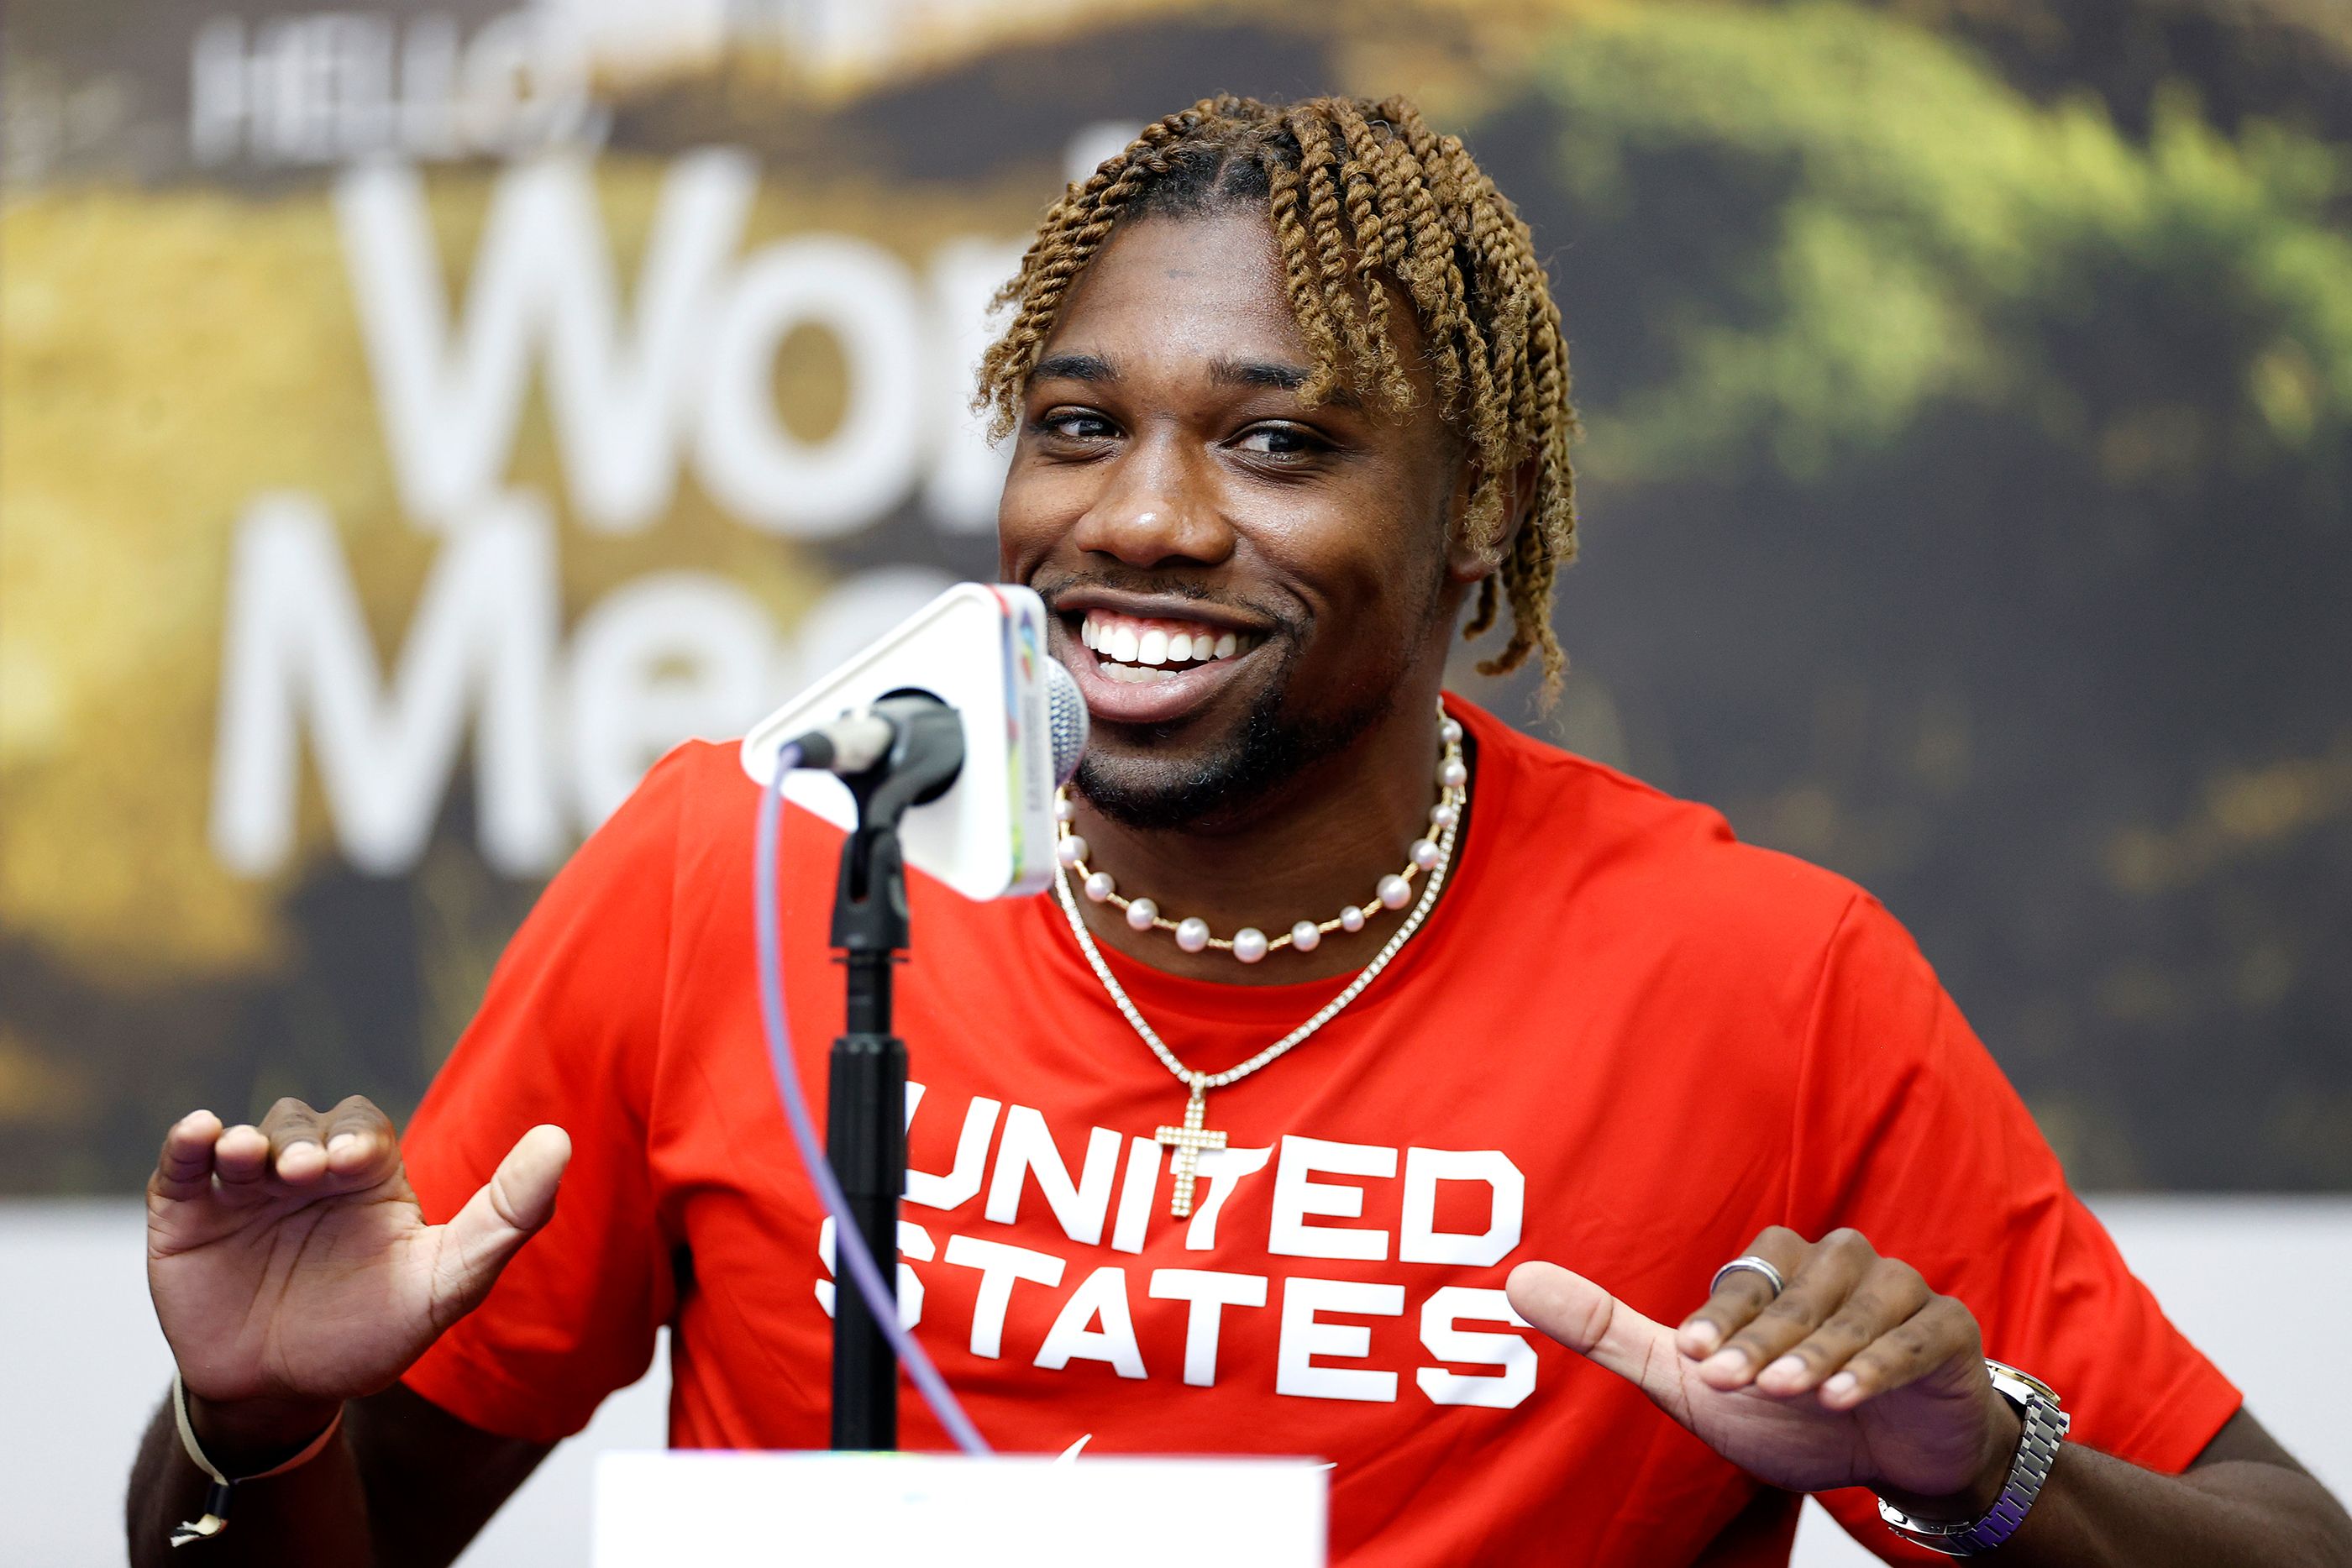 Noah Lyles at the USA press conference ahead of the World Athletics Championships Oregon22